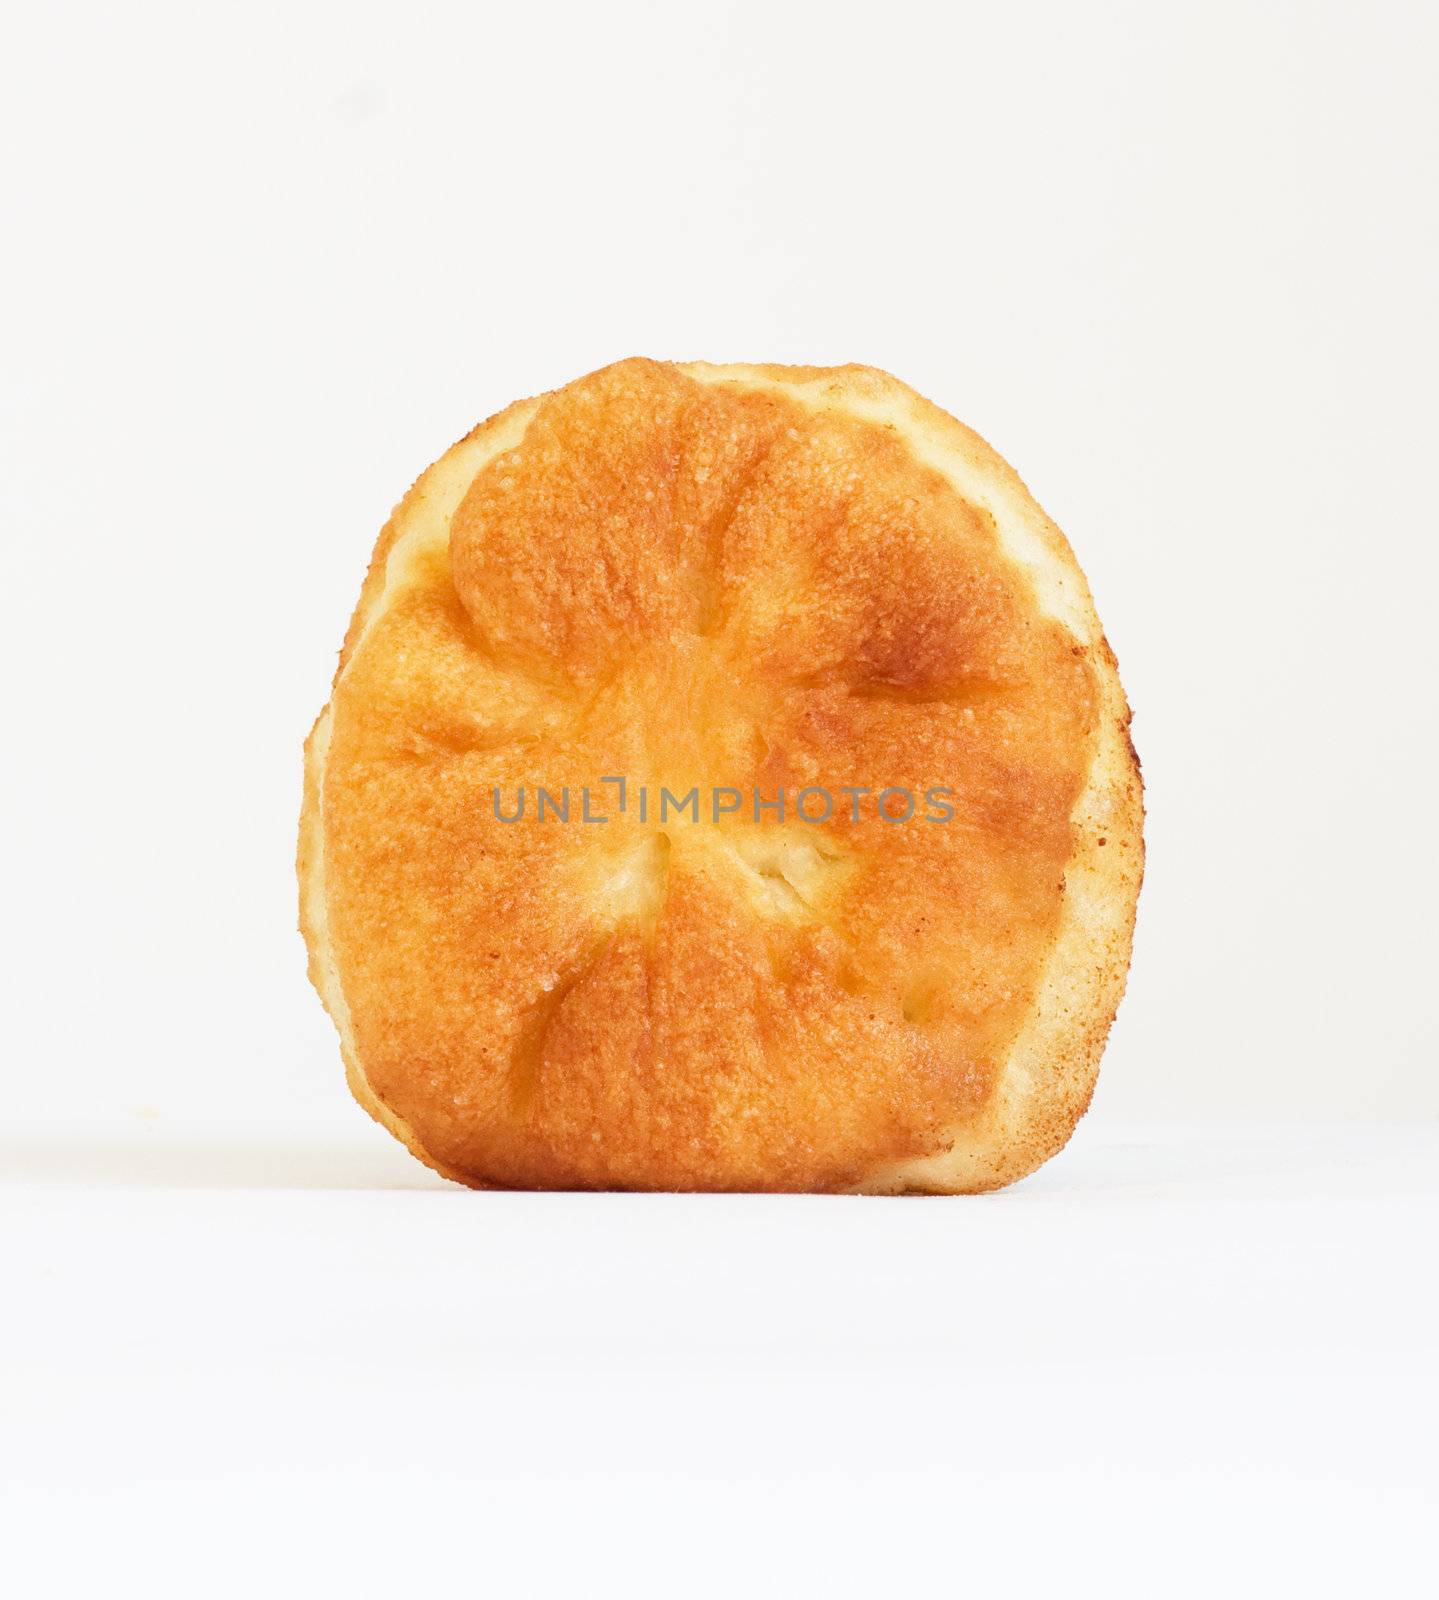 One oven baked pasty over white background. Looks delicious.  by schankz